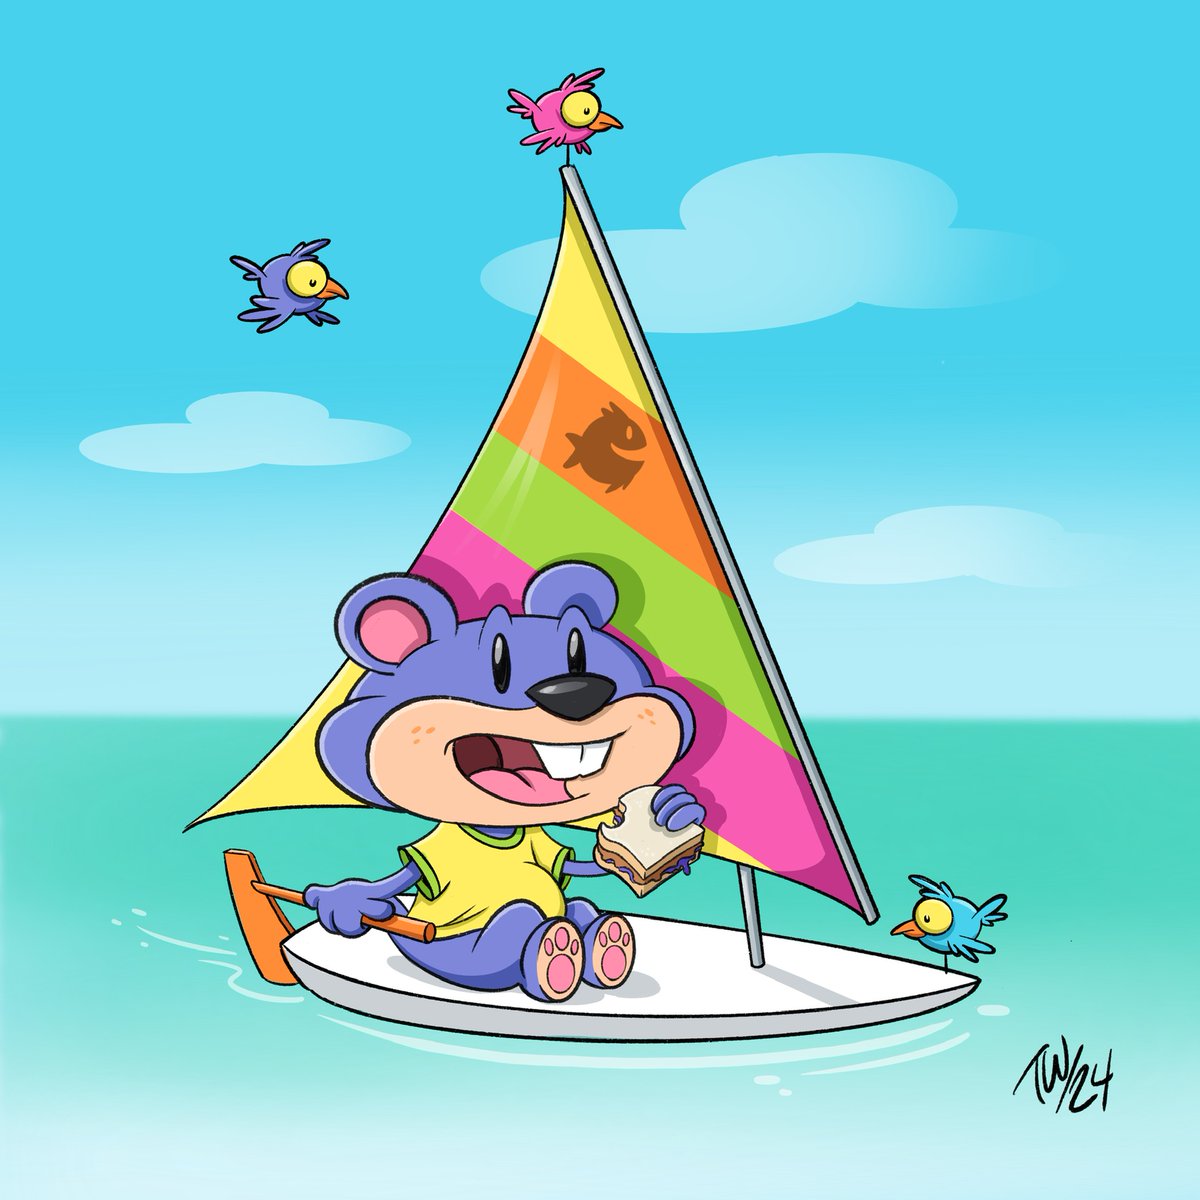 S is for SAILBOAT 
Thankful and honored to the fine folks @AnimalAlphabets 
for reaching out me to take on this prompt. 

#animalalphabets #animals #illustration
#sketch #sketchoftheday #dailysketch #kidlitart 
#kidlitillustration #cartoon #cartoonist